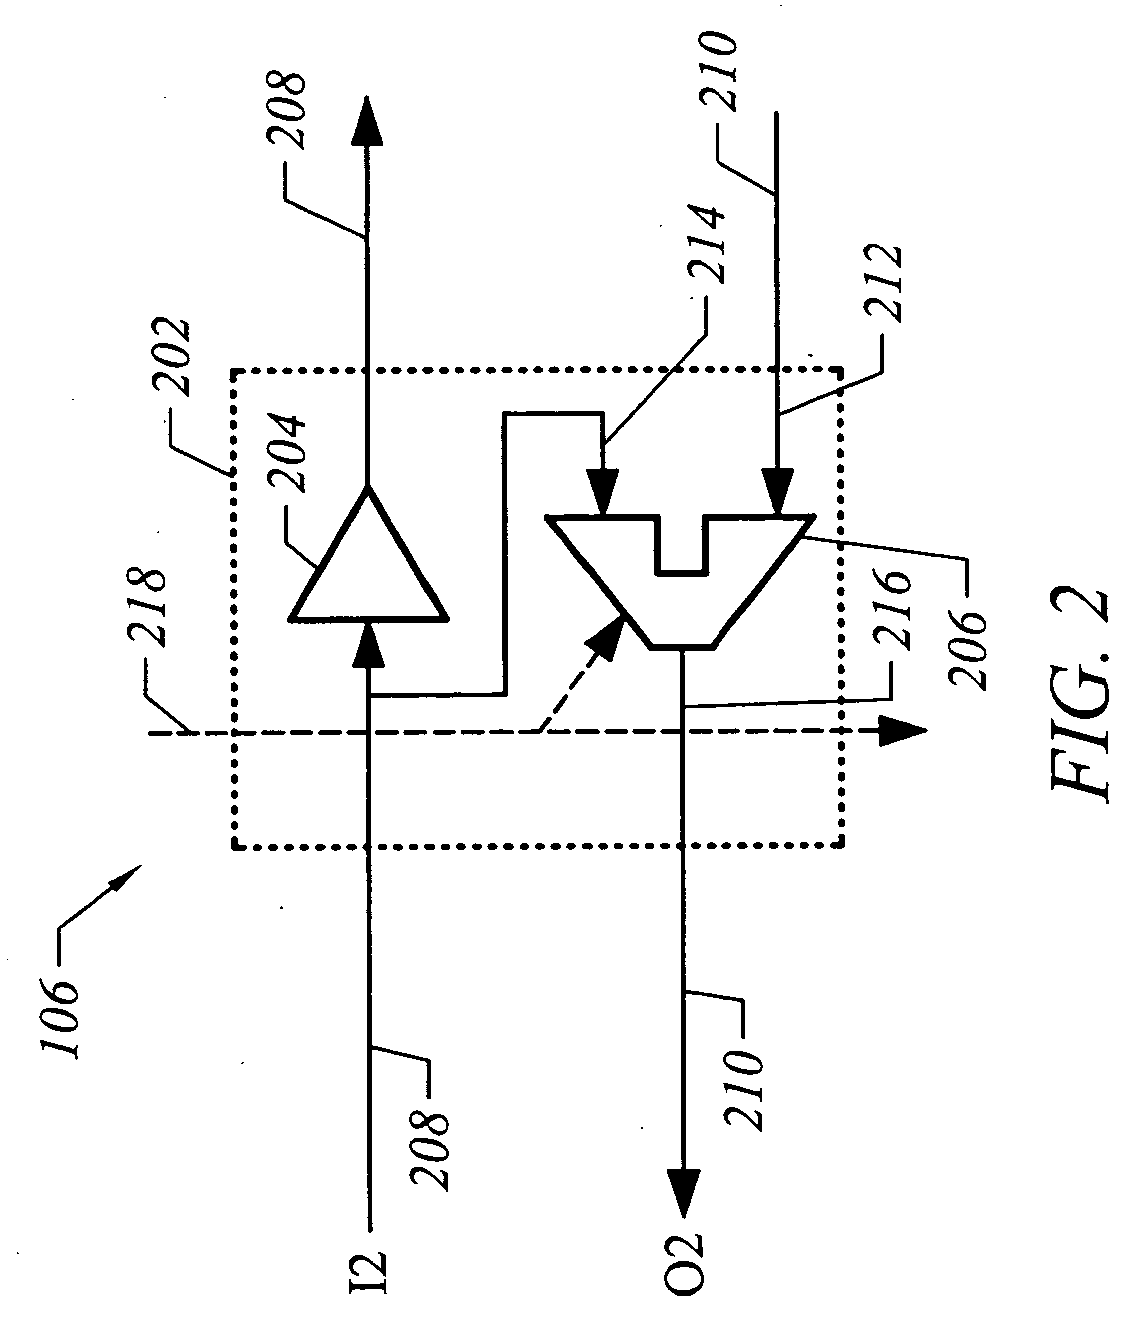 Delay locked loop circuit and method for testing the operability of the circuit